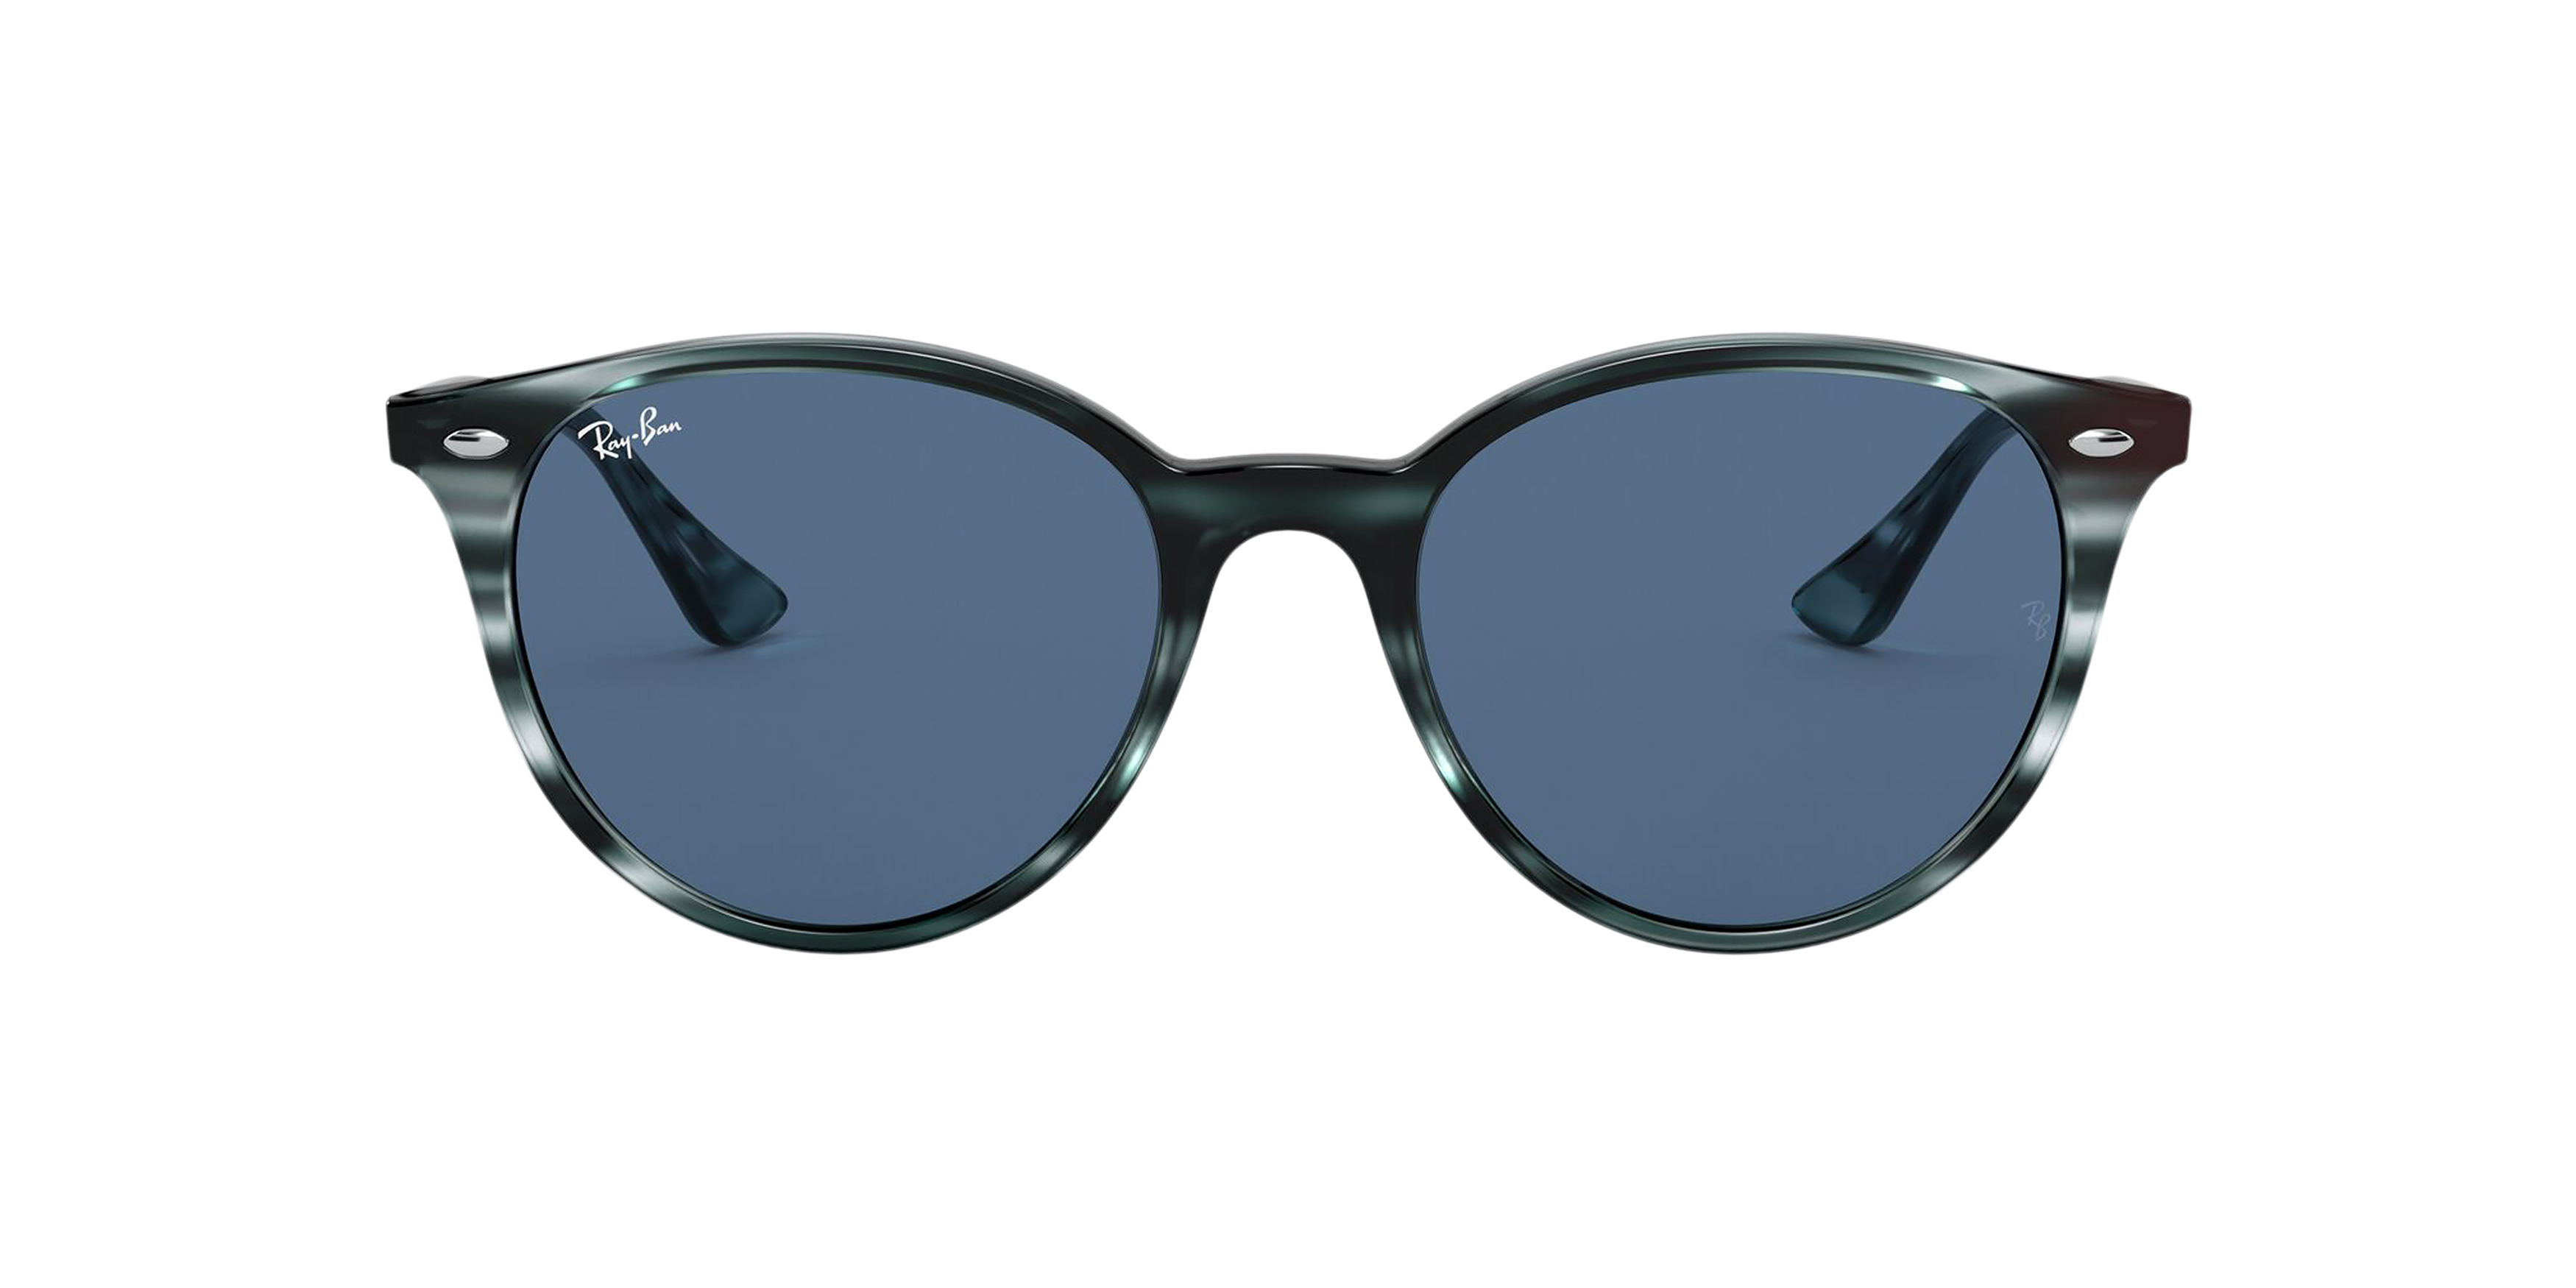 [products.image.front] Ray-Ban RB4305 643280